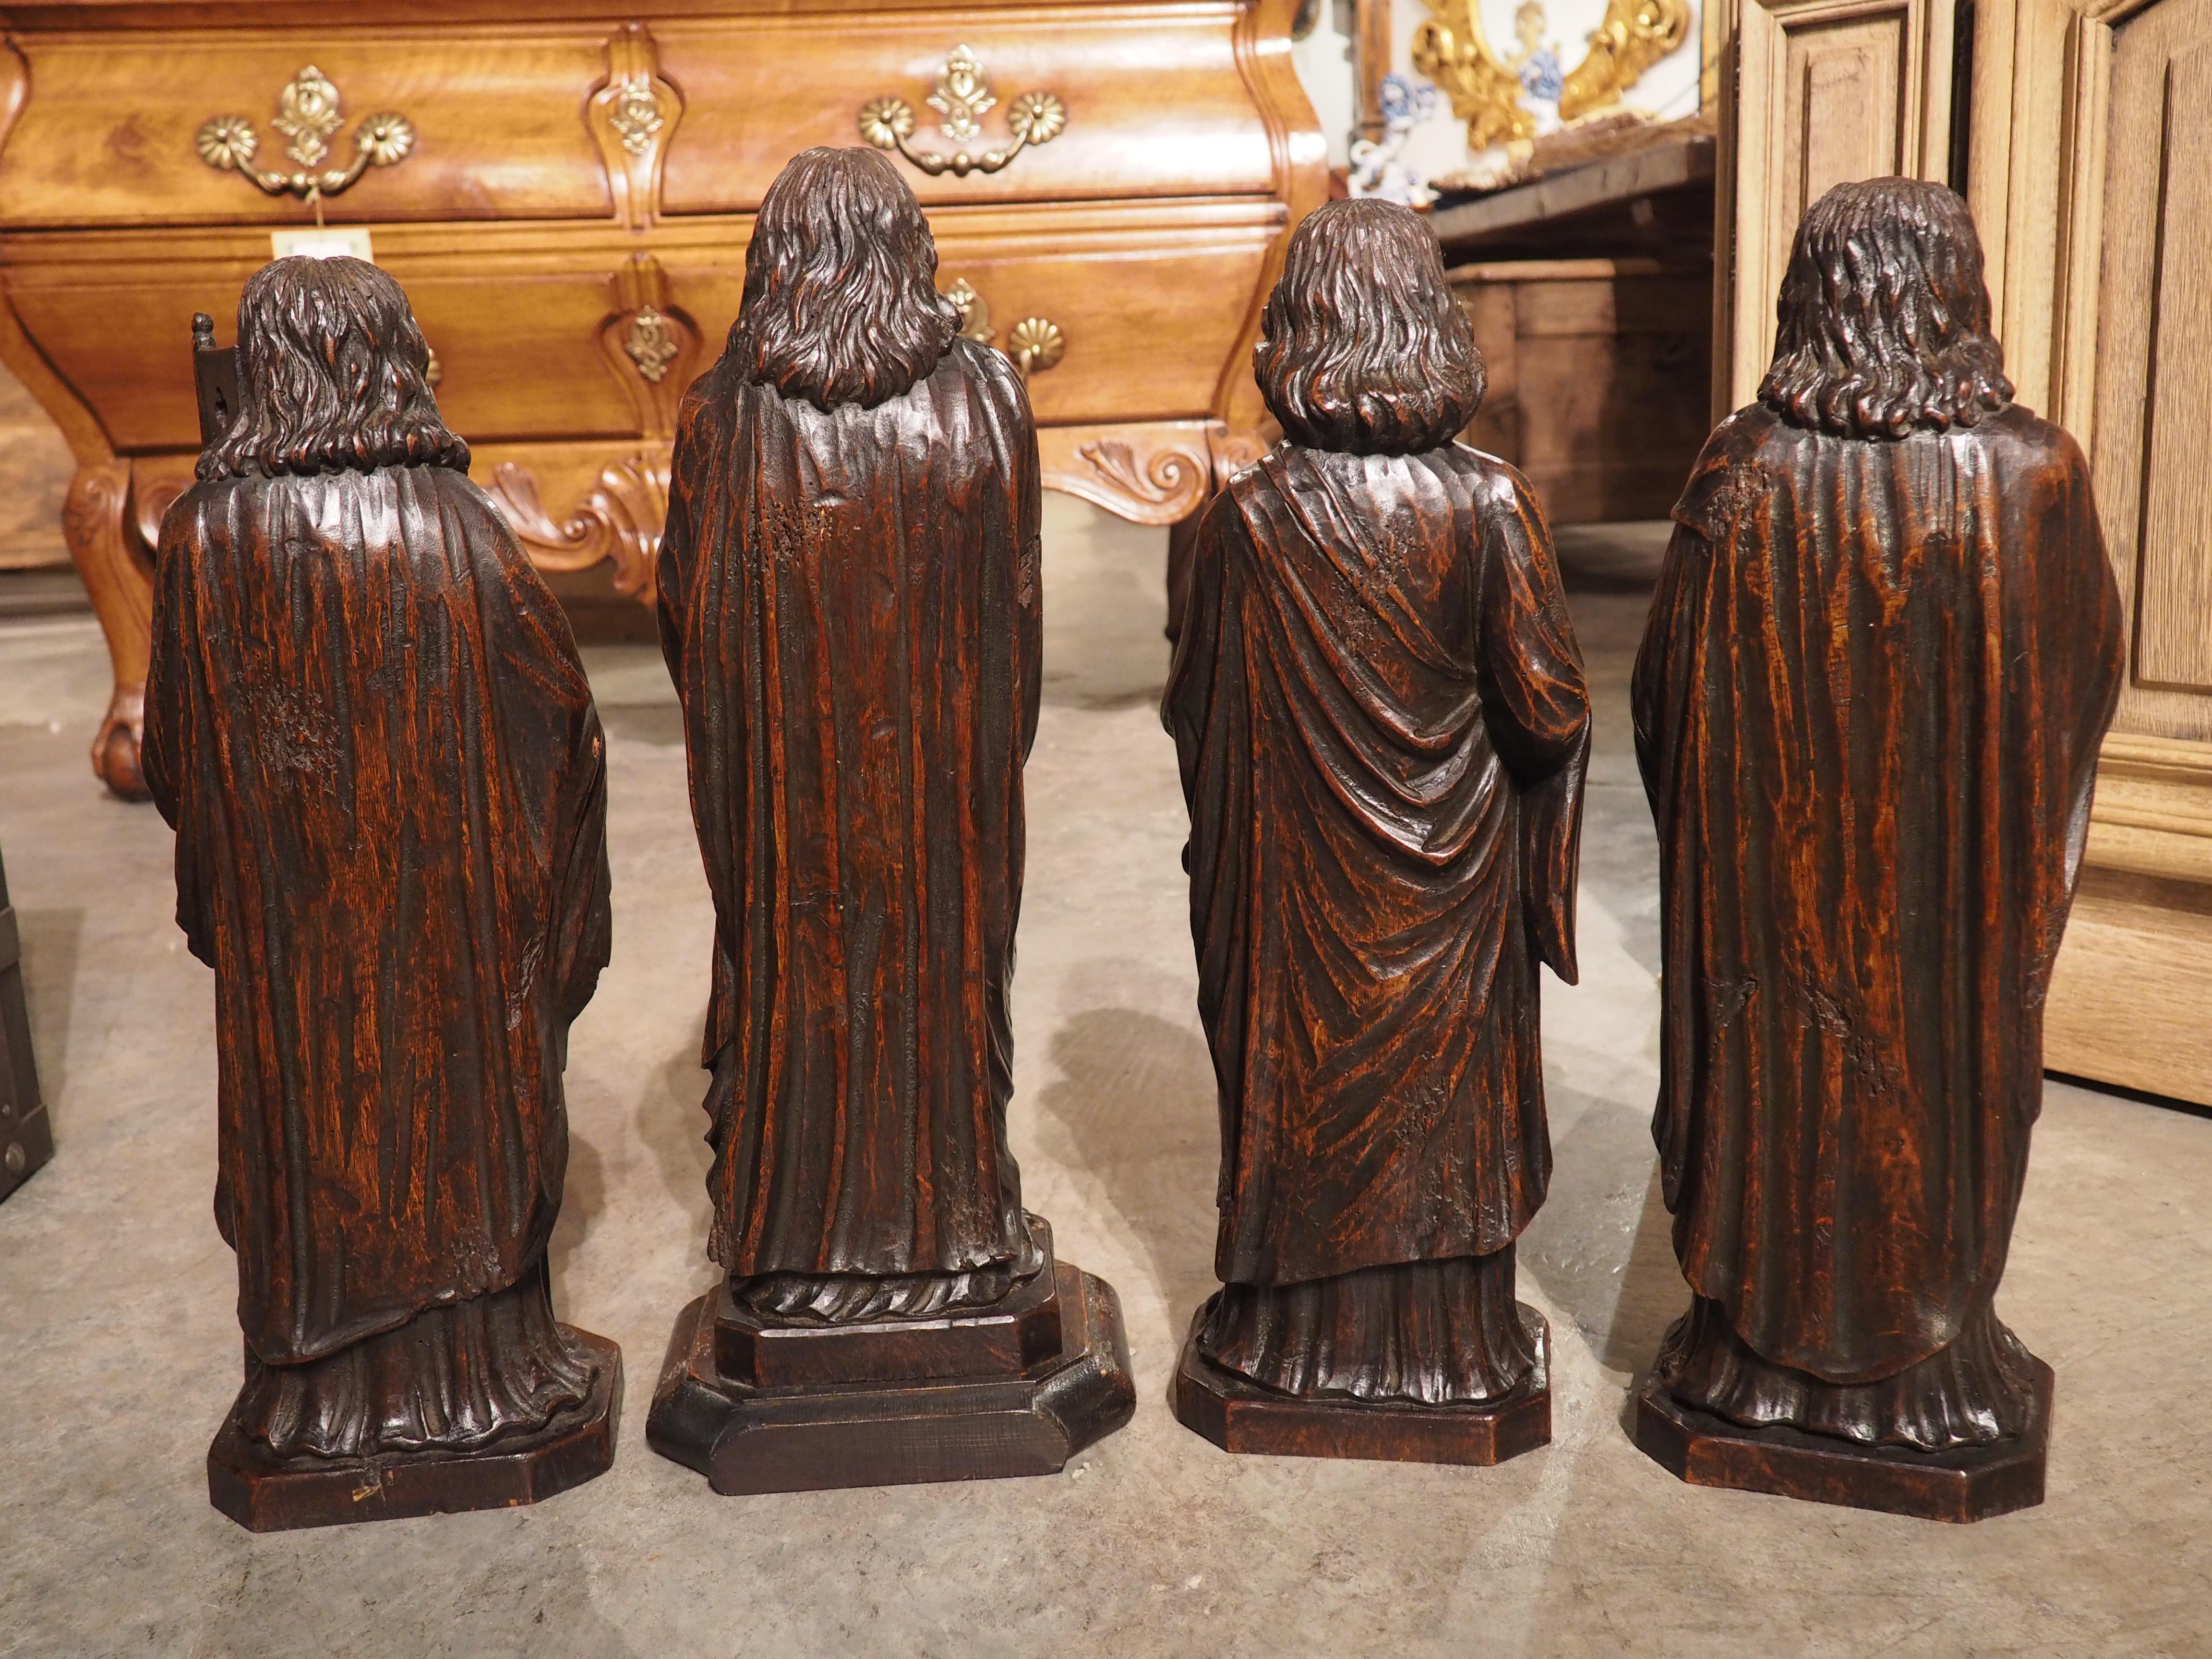 Circa 1800 Carved Oak Sculptures of the Apostles, James, John, Peter, and Paul For Sale 8